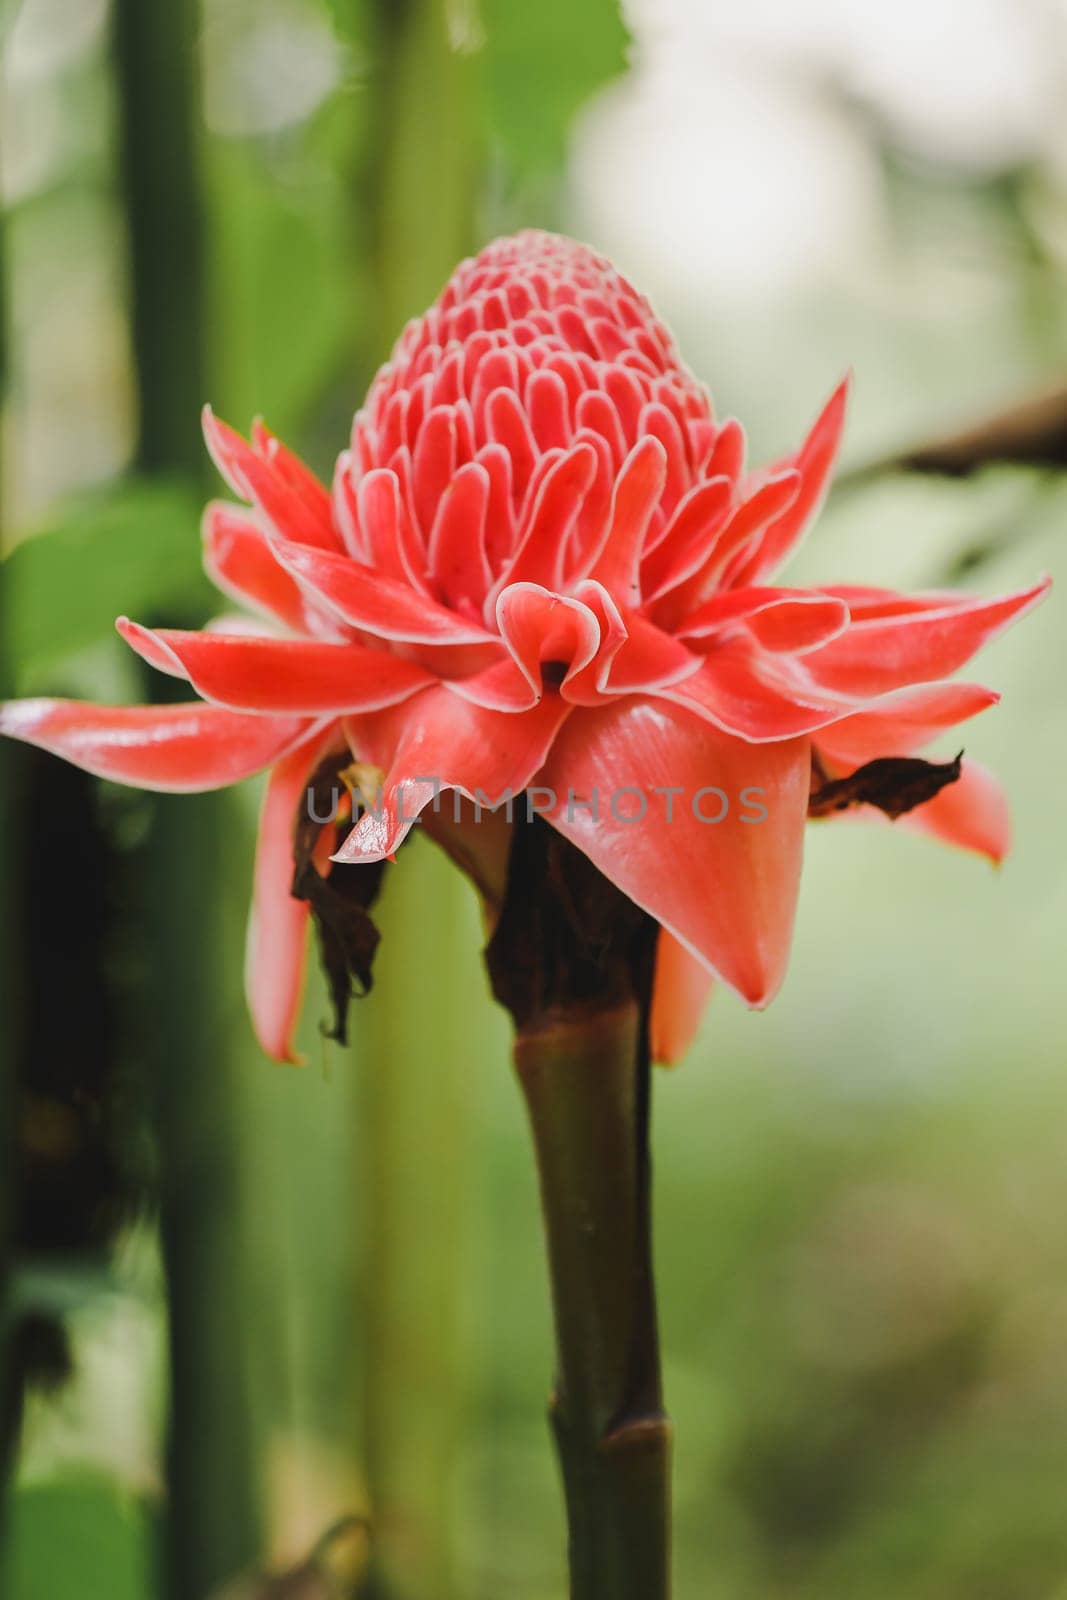 Torch Ginger is a biennial plant that has beautiful flowers. There is a growing popularity as cut flowers for sale.